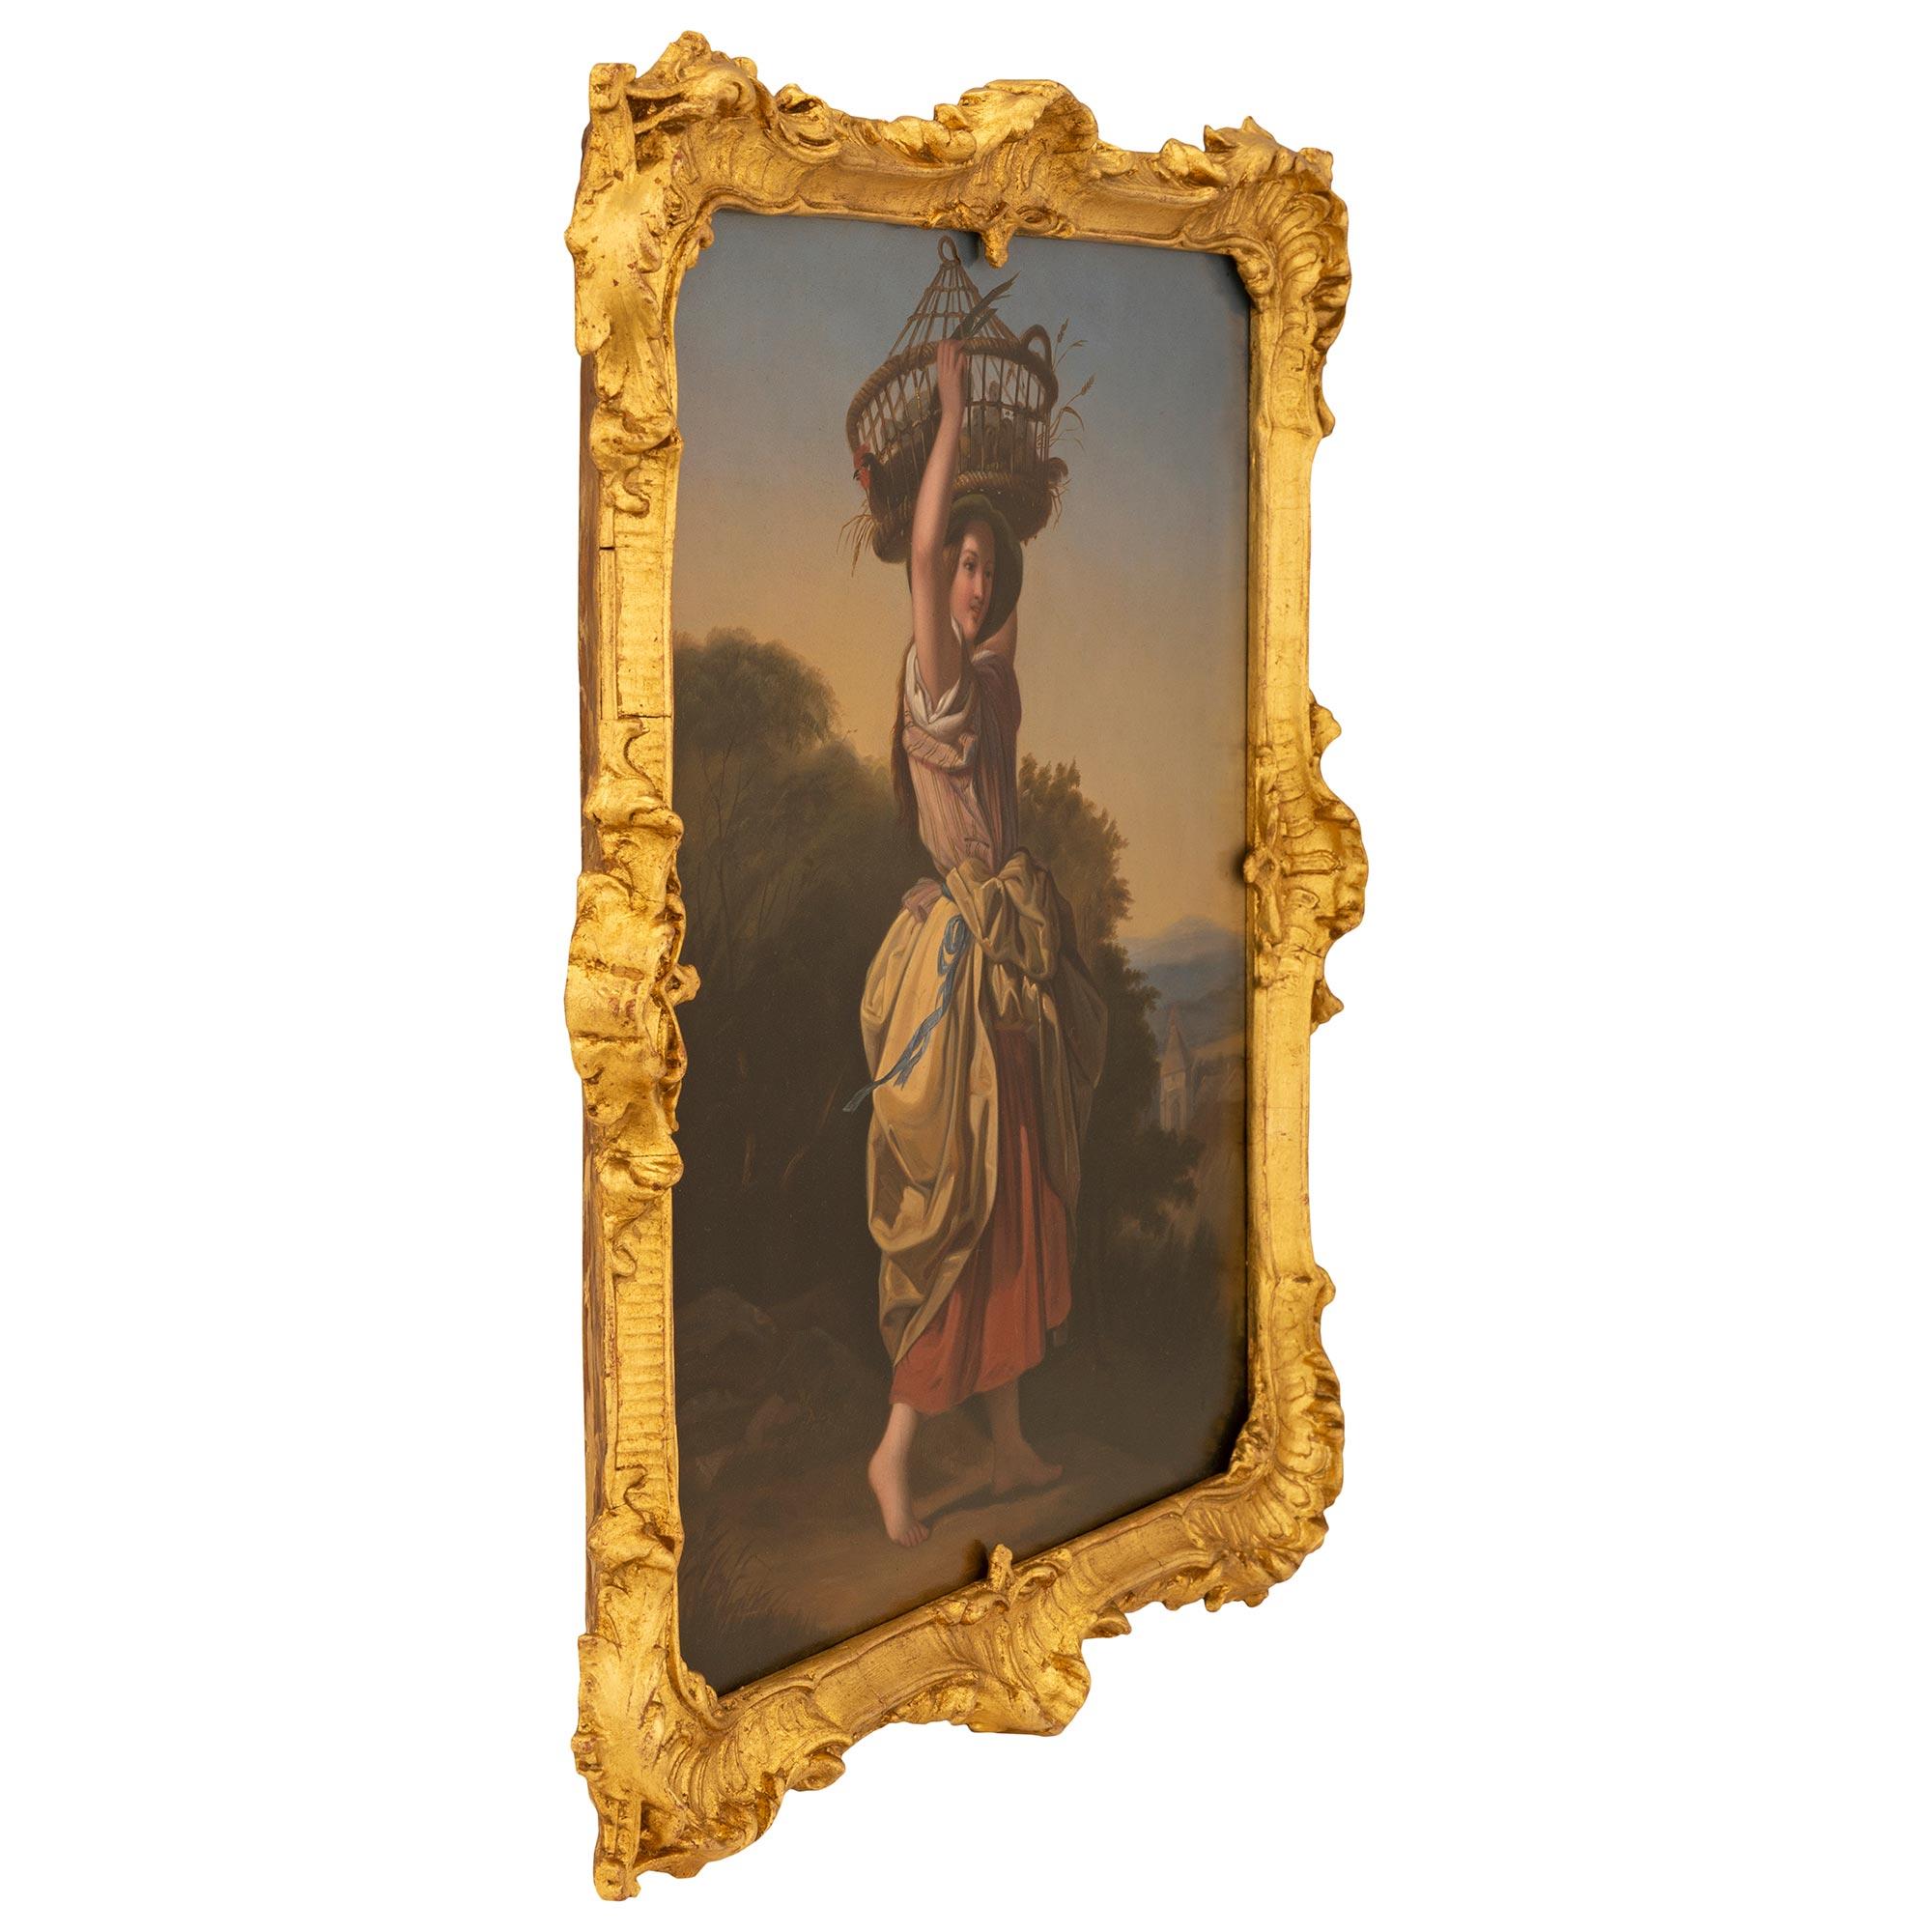 An exceptional French 18th century oil on copper painting in its original giltwood frame. The wonderfully executed painting depicts a beautiful young woman in a bonnet and flowing dress walking barefoot carrying a basket with chickens on her head